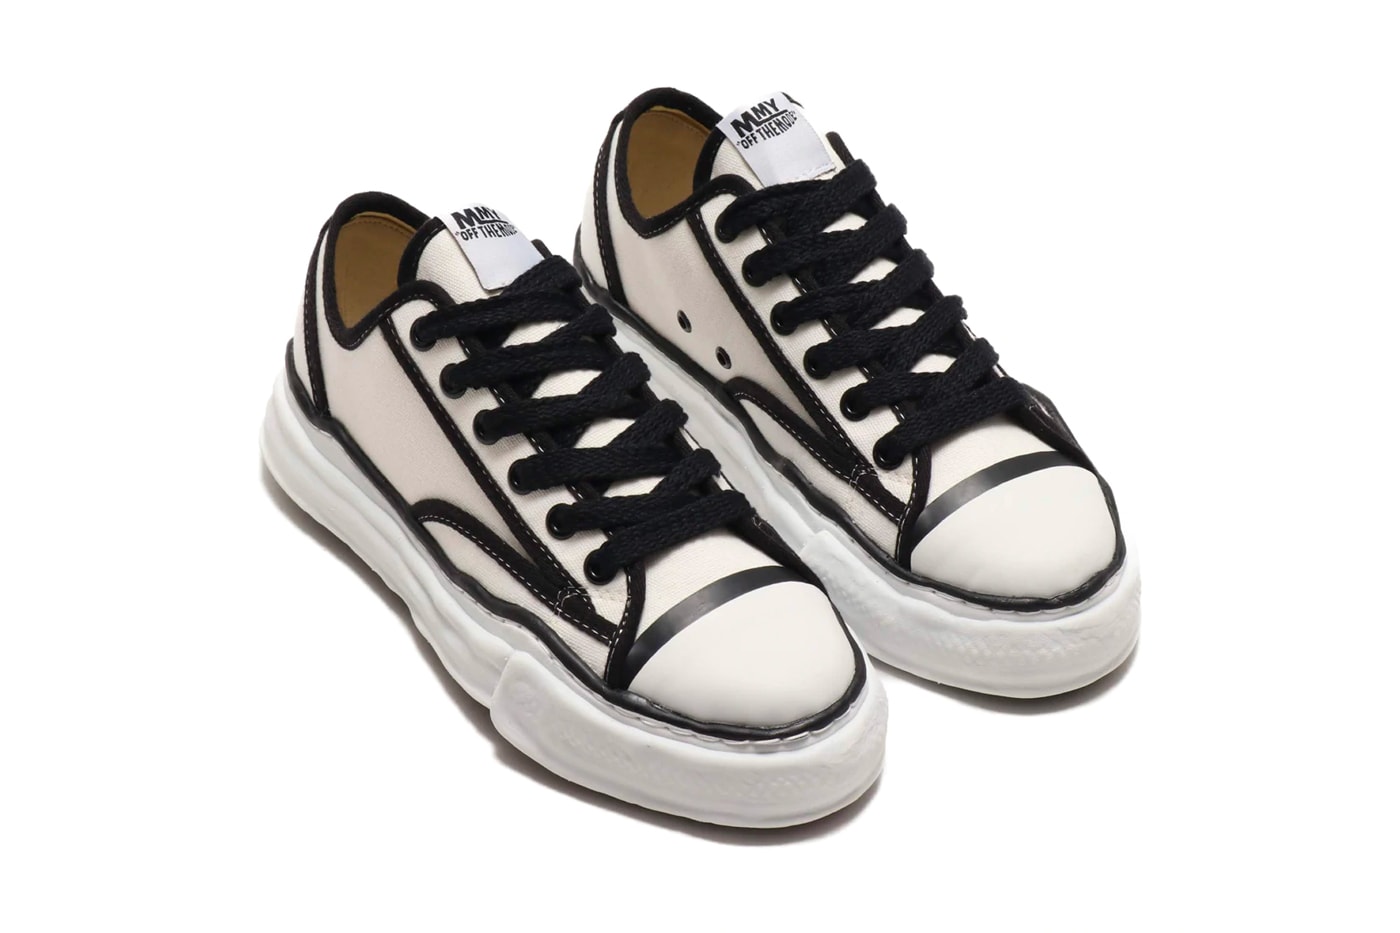 Maison Mihara Yasuhiro OG Sole Sneakers White black multi color sneakers shoes footwear kicks runners trainers original chunky thick melting canvas piping japanese spring summer 2020